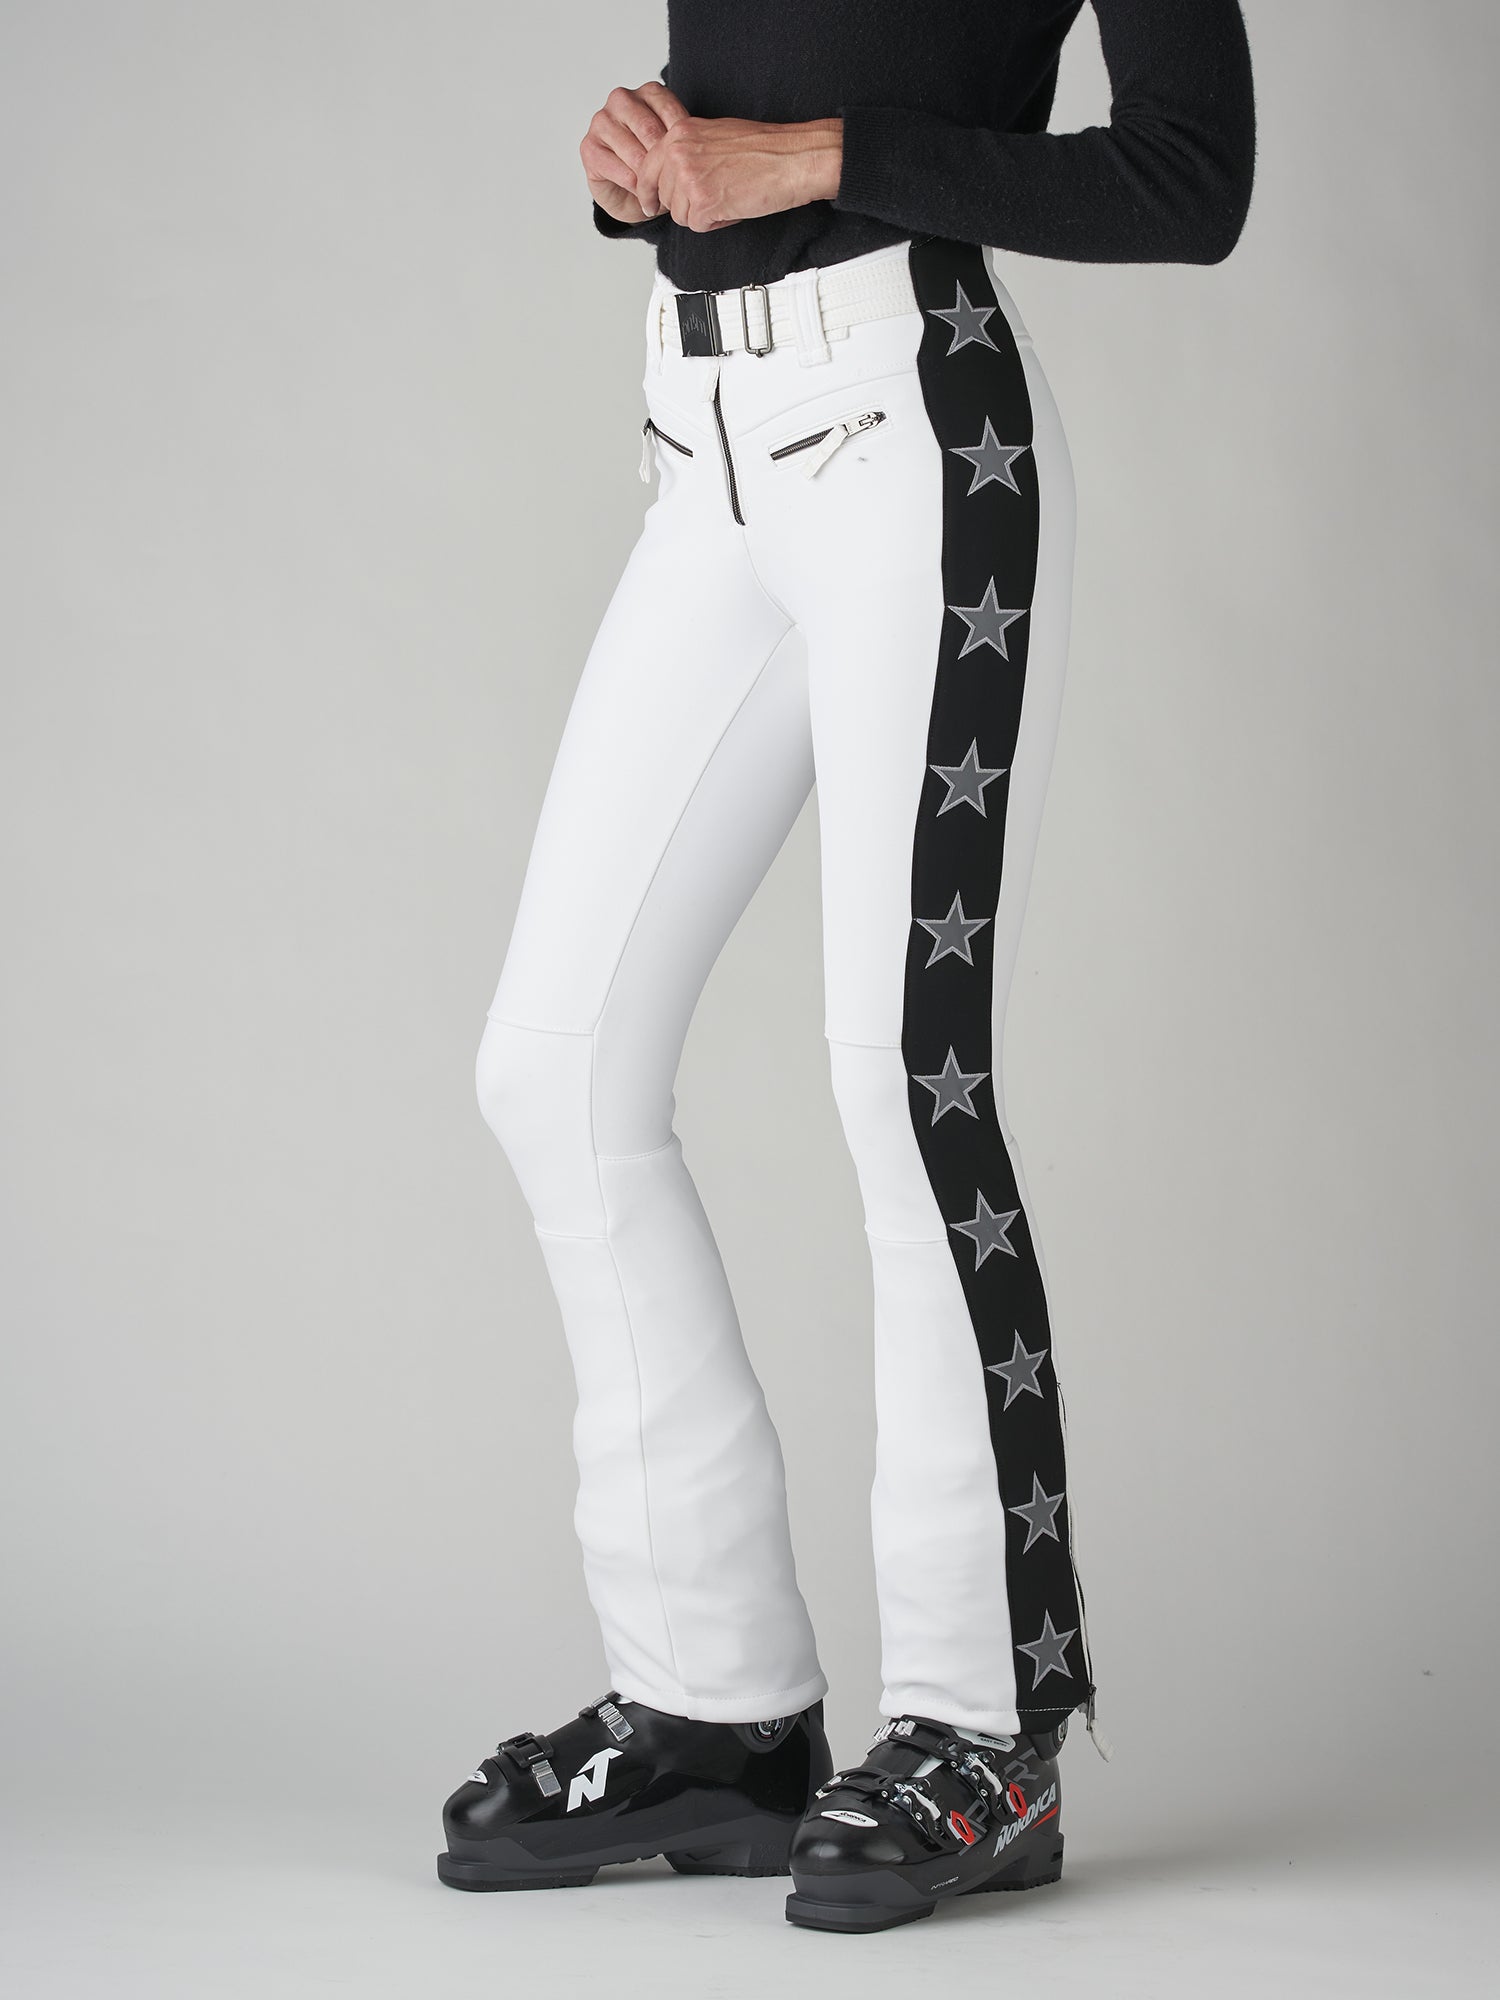 with White Stripes_Womens Stretch ski Pants_Pants for Women_Womens